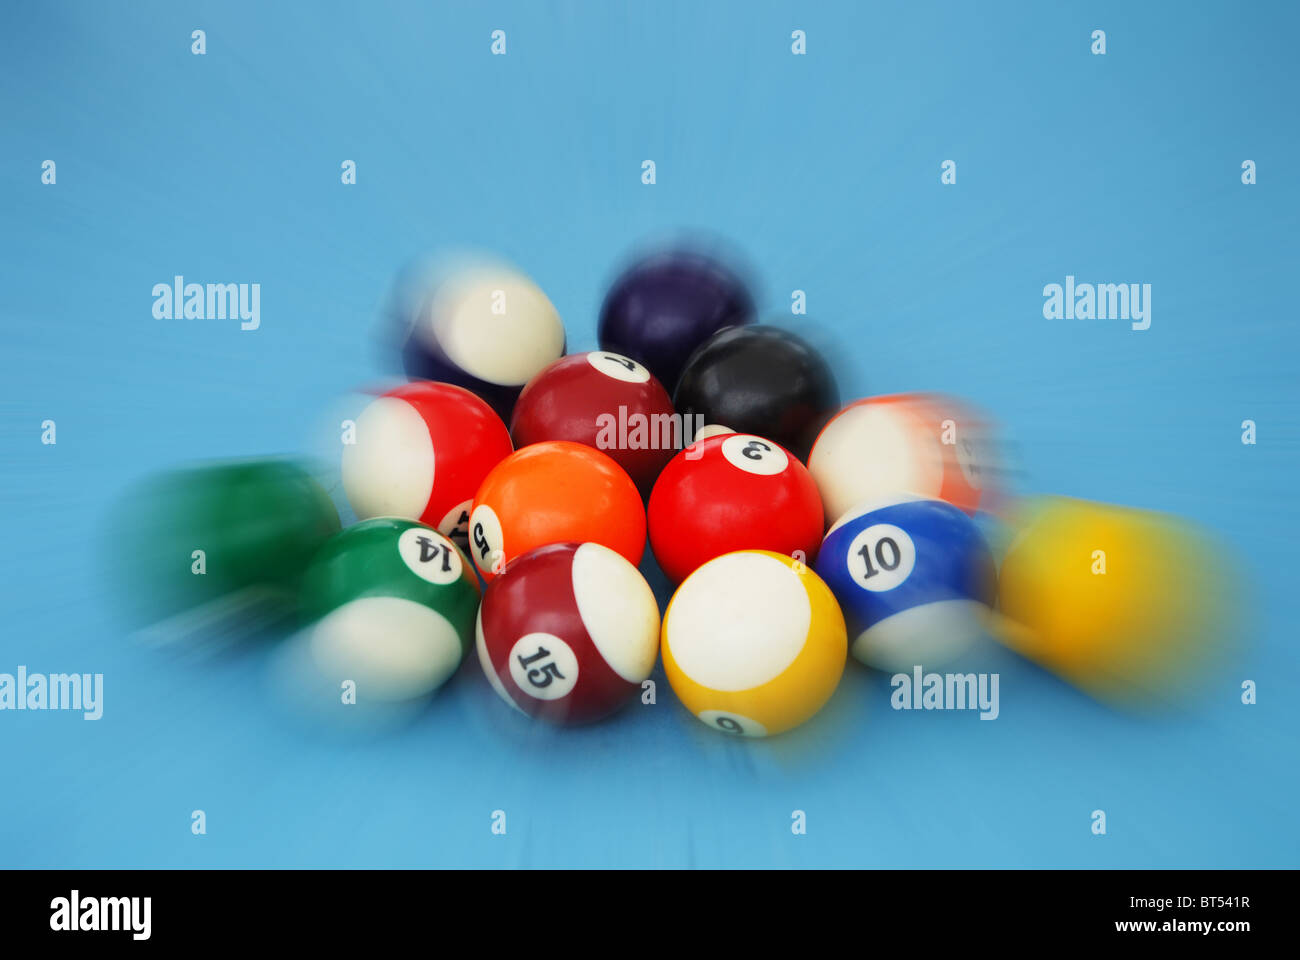 snooker balls in motion Stock Photo